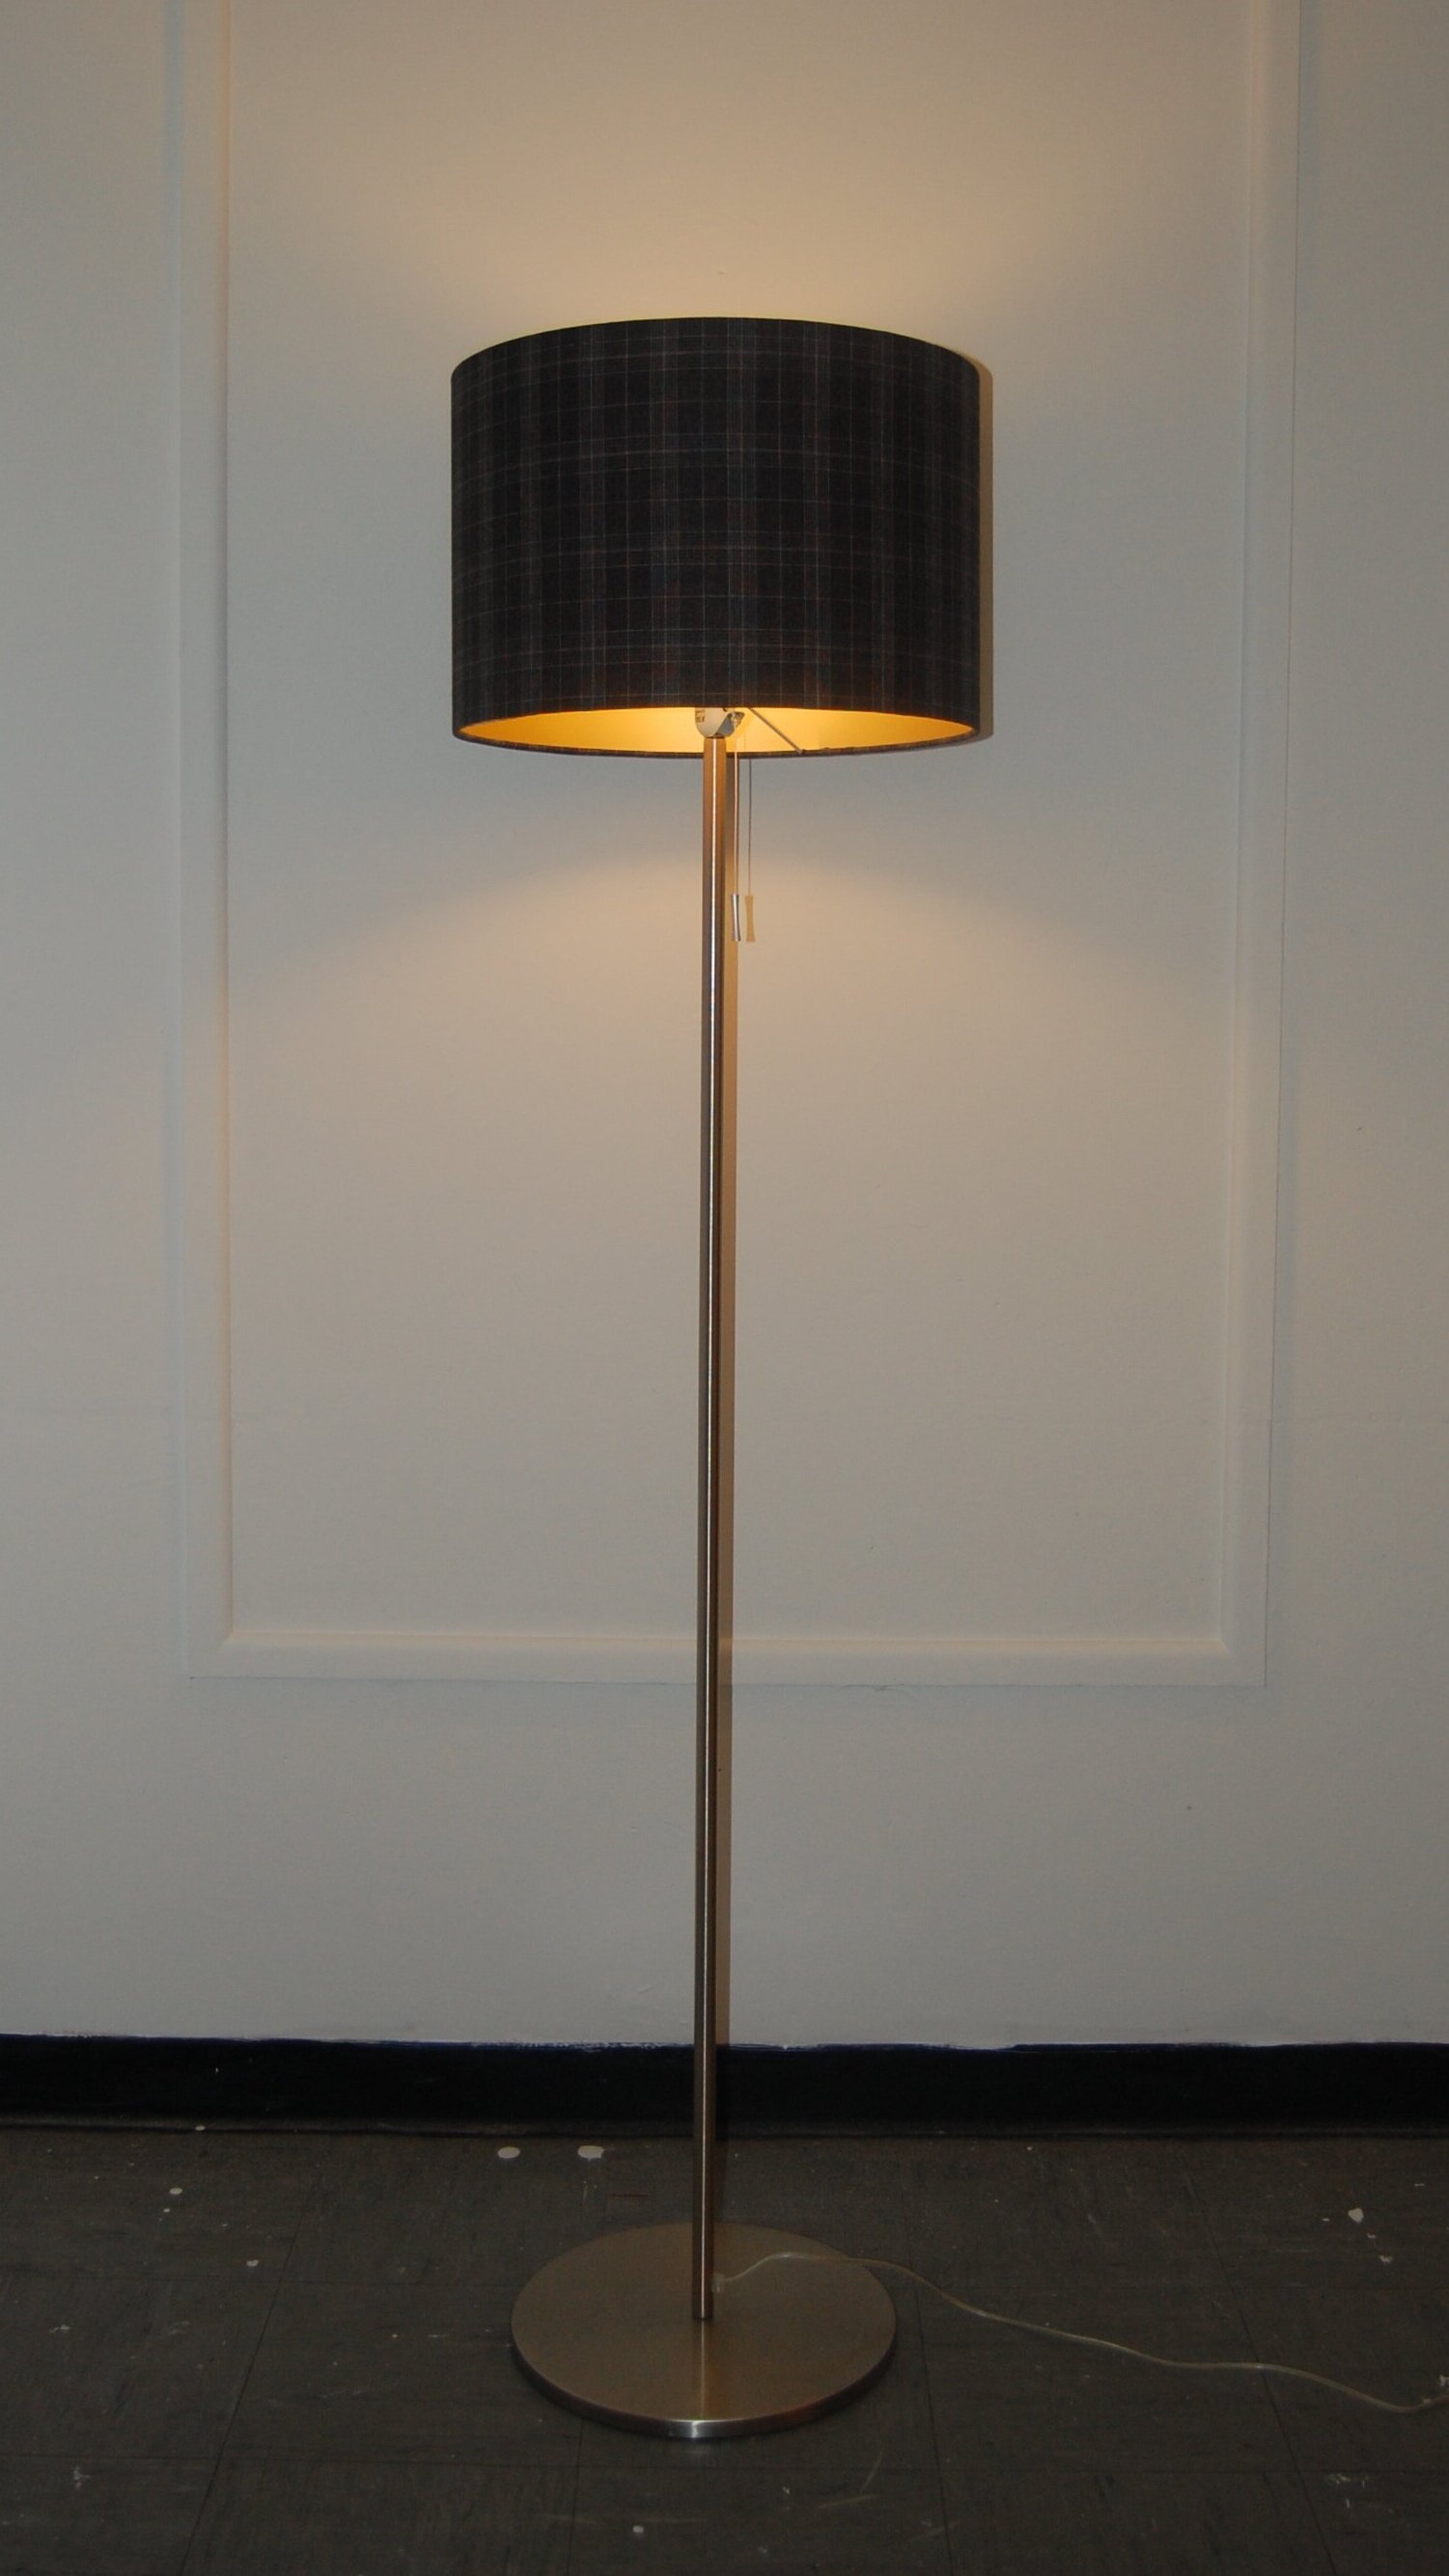 Bespoke Floor Lamp Shades And Standard, How To Change Floor Lamp Shade